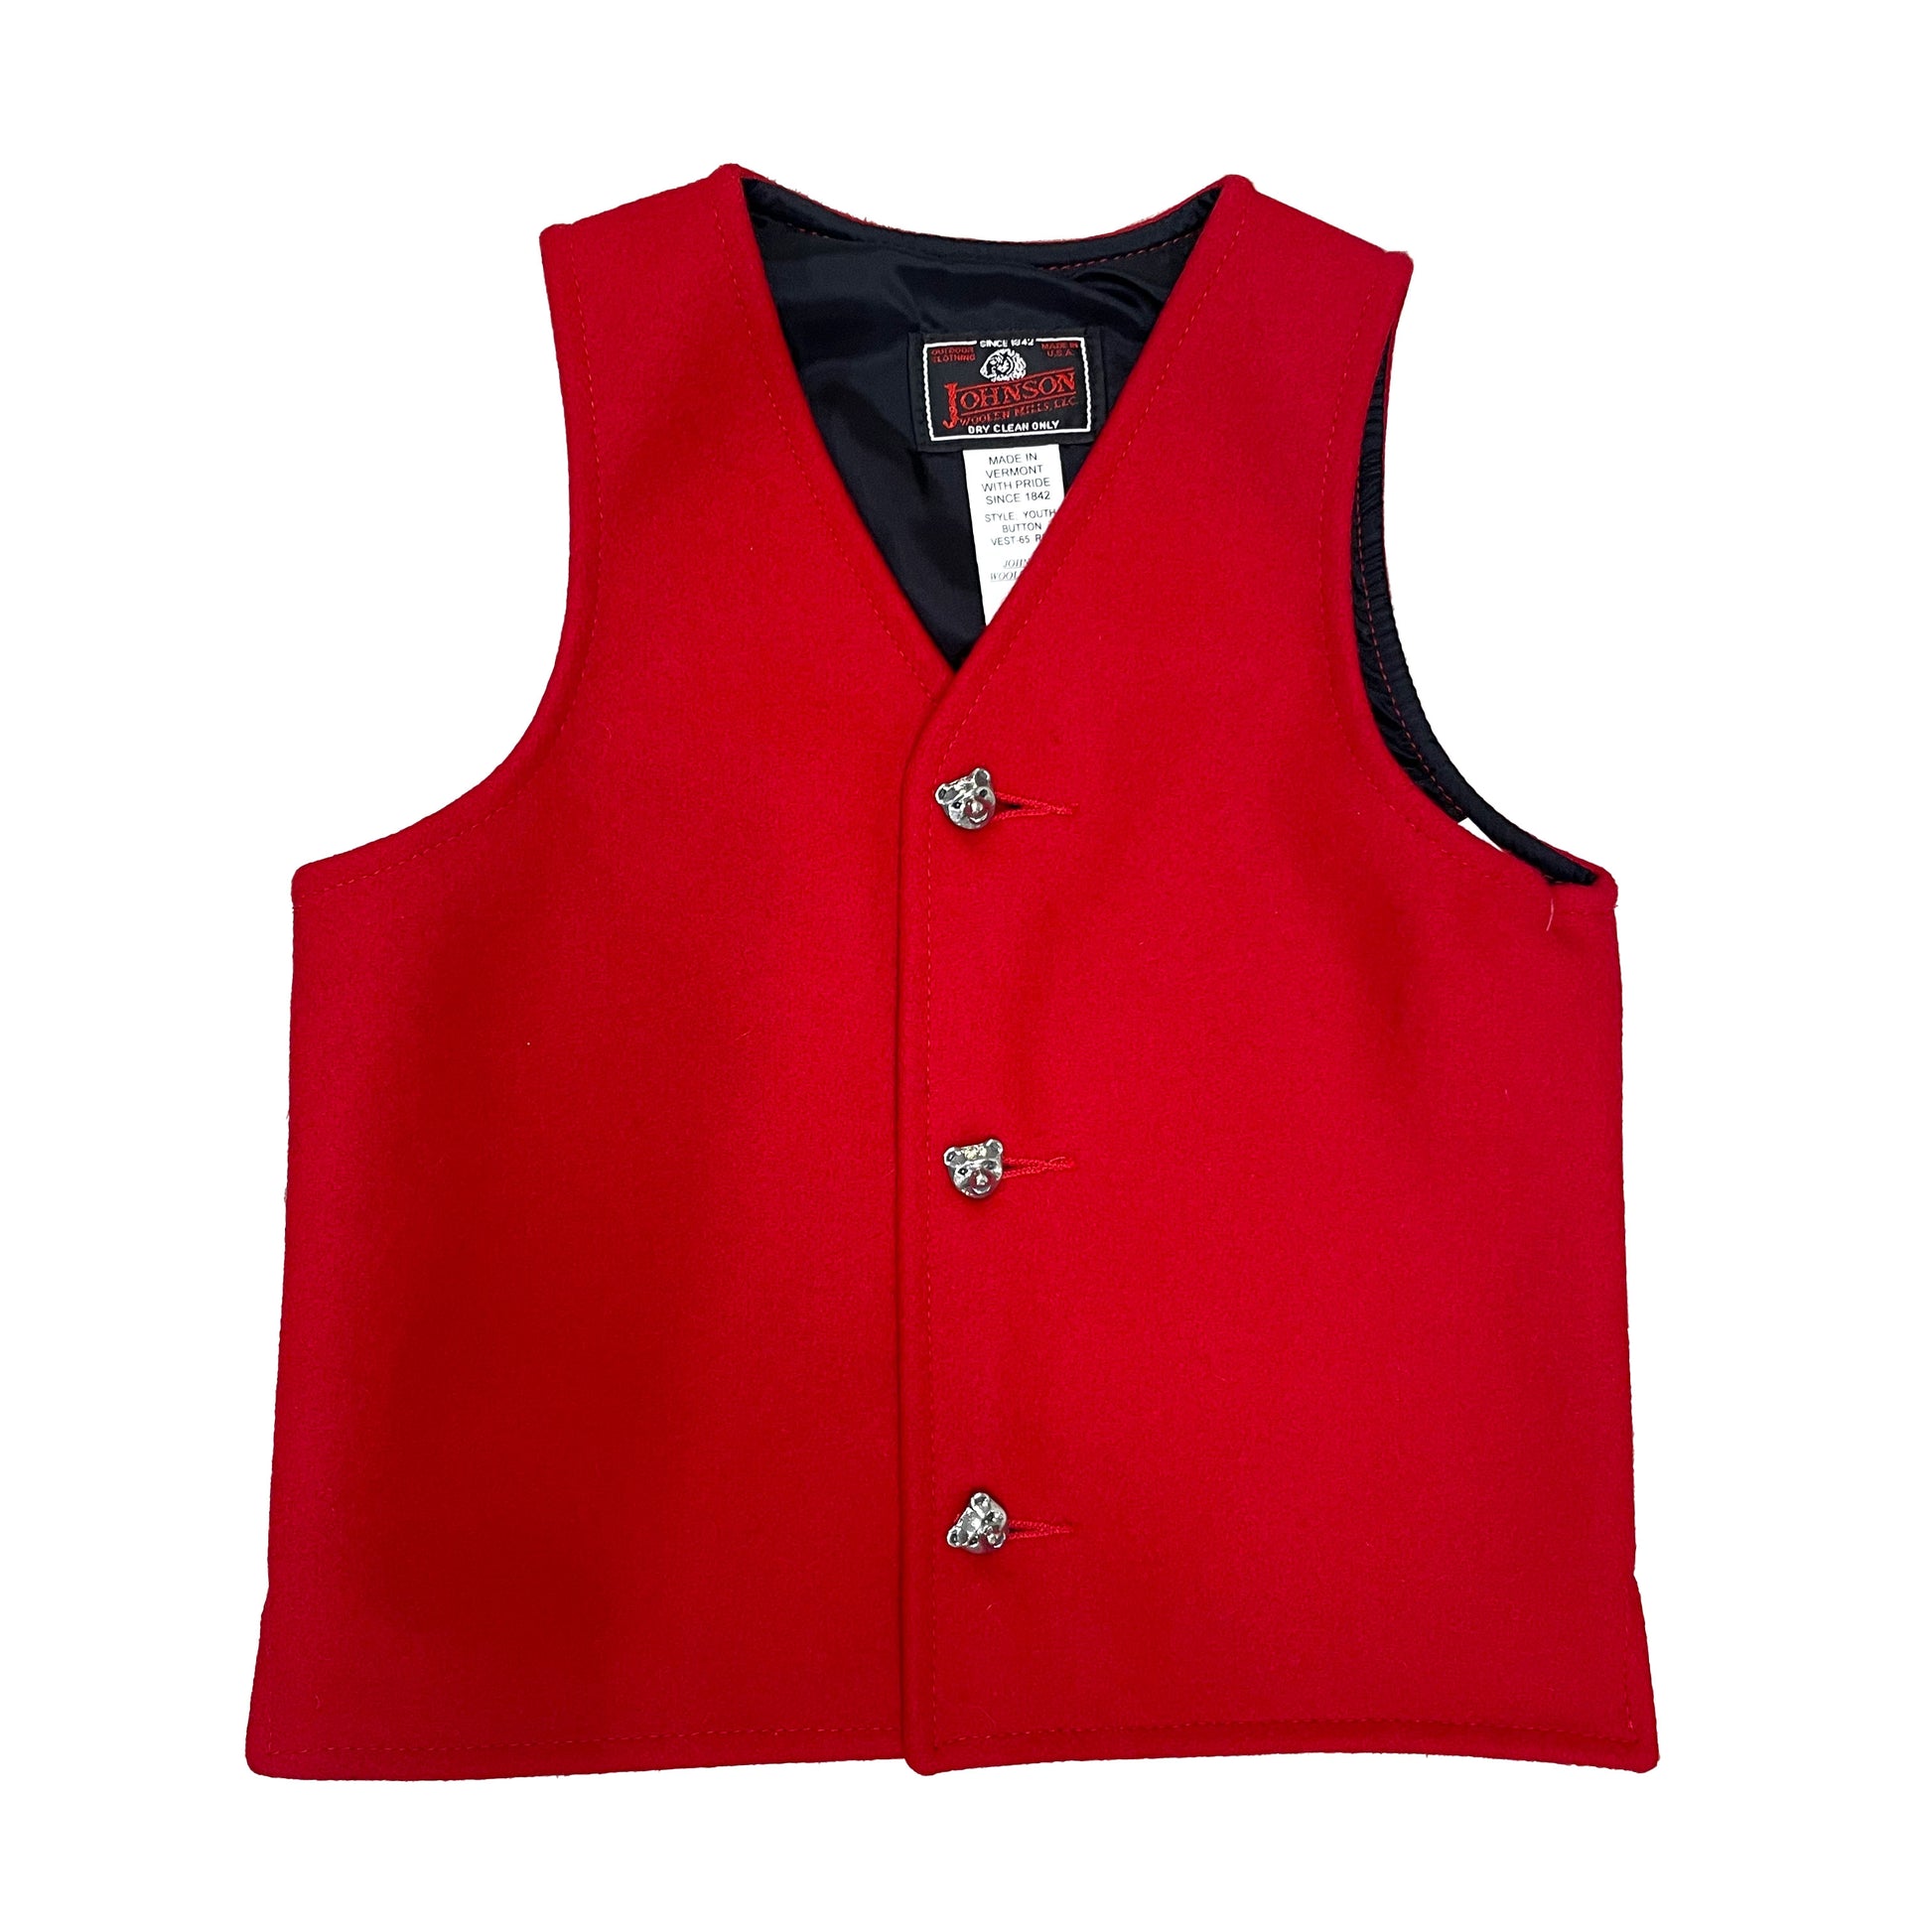 Children's wool vest in red with three bear buttons